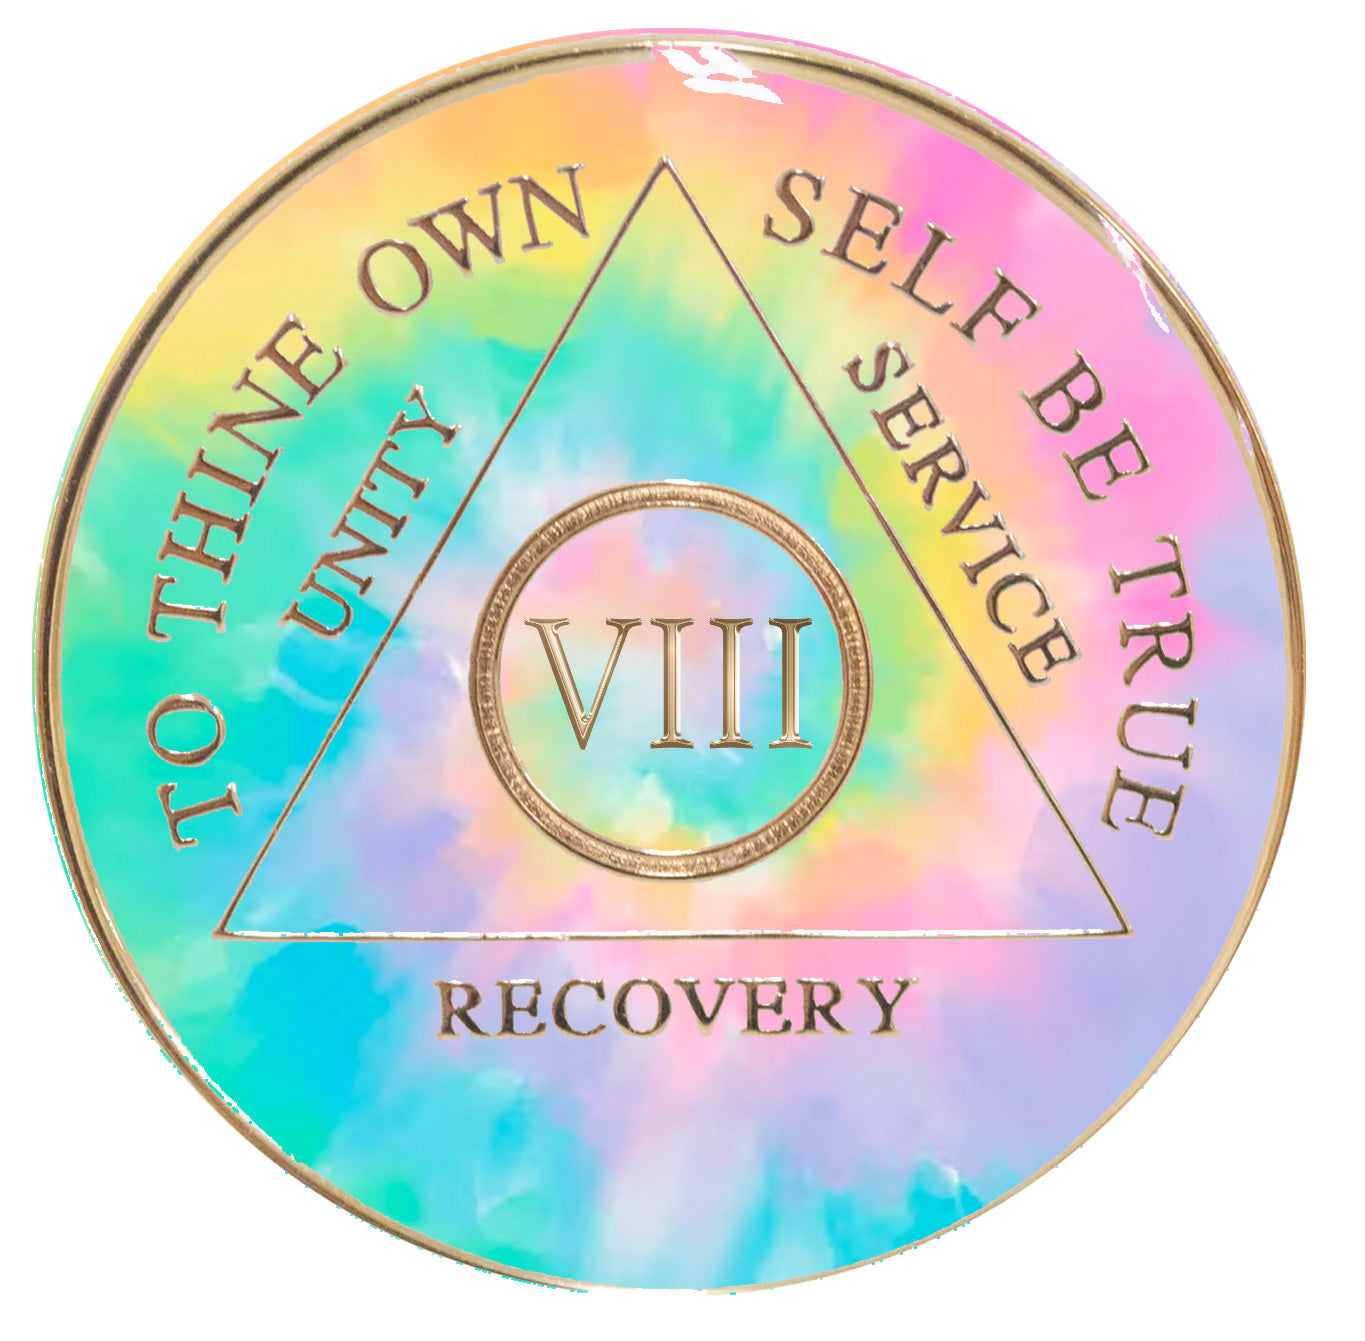 8 year AA psychic-delic change medallion is tie-dye in soft pink, yellow, purple, and blues with the circle, triangle, roman numeral, unity, service, recovery, and to thine own self be true embossed in 14k gold, and the tie-dye representing change.